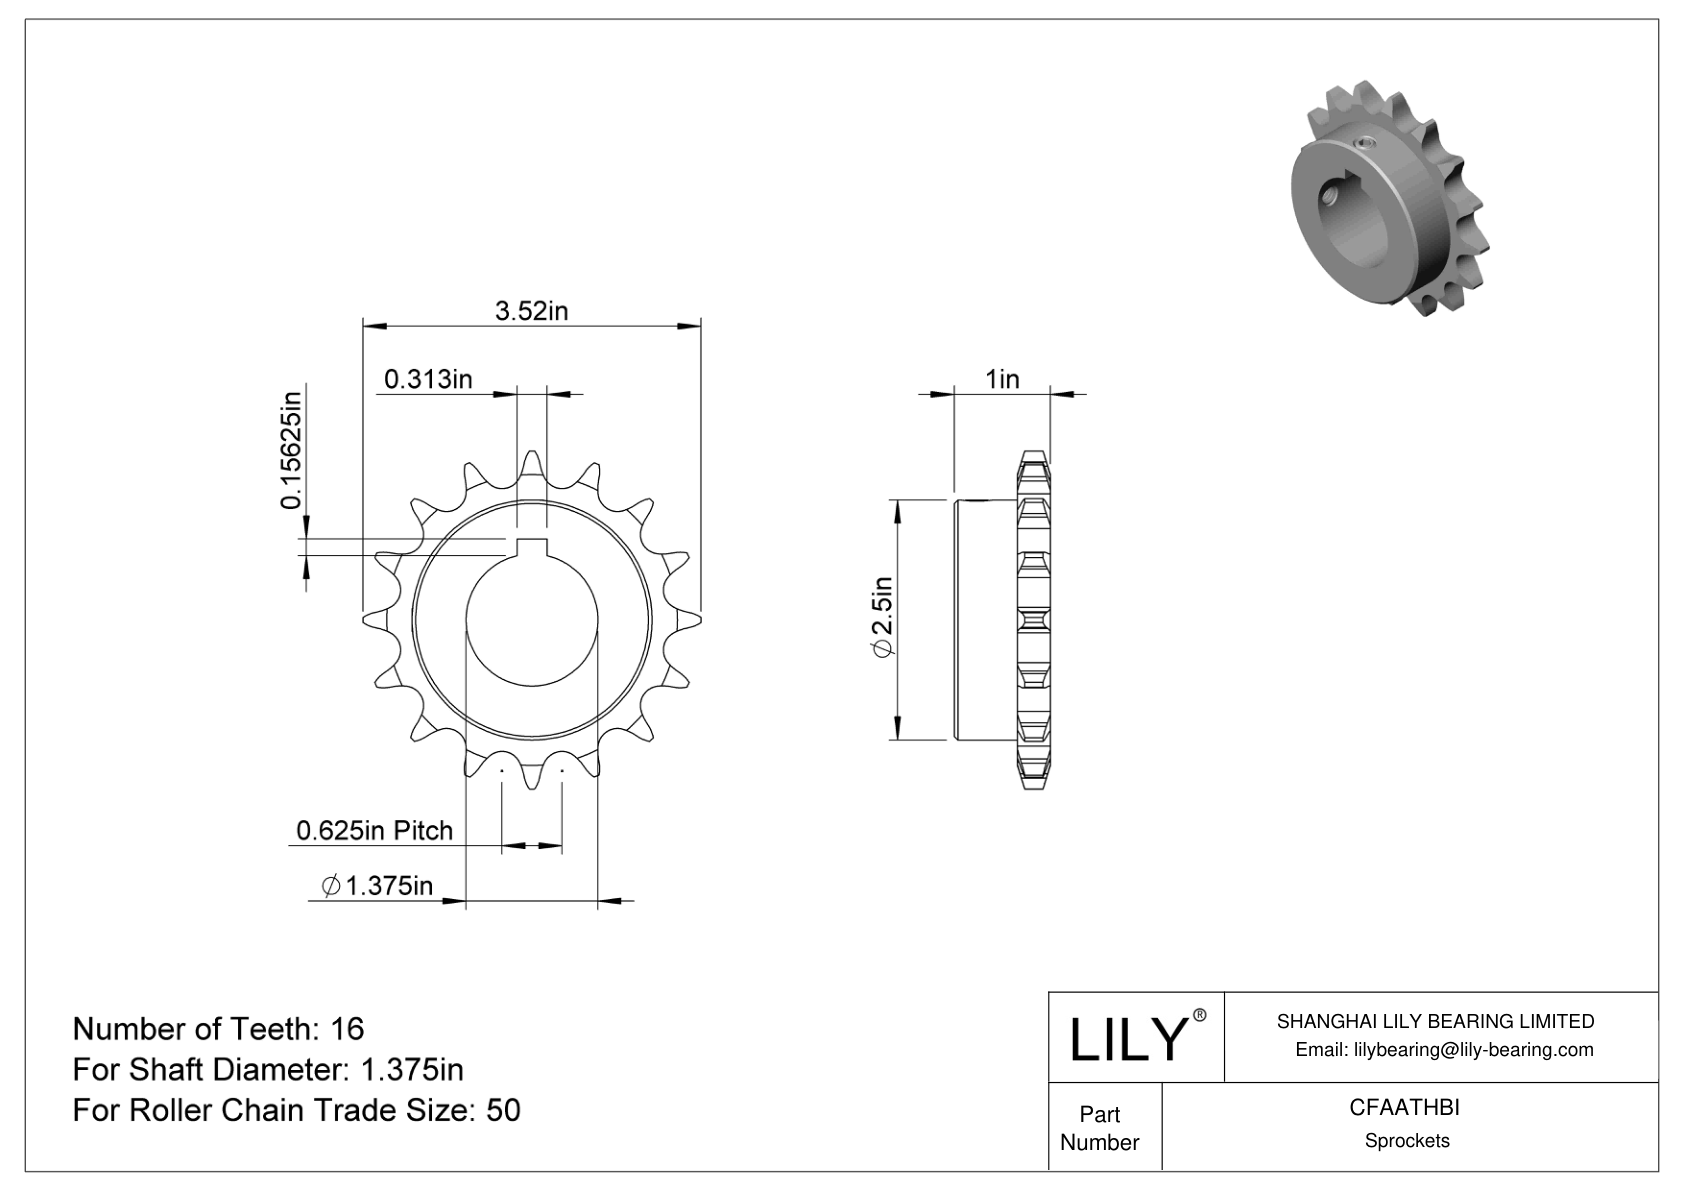 CFAATHBI Wear-Resistant Sprockets for ANSI Roller Chain cad drawing